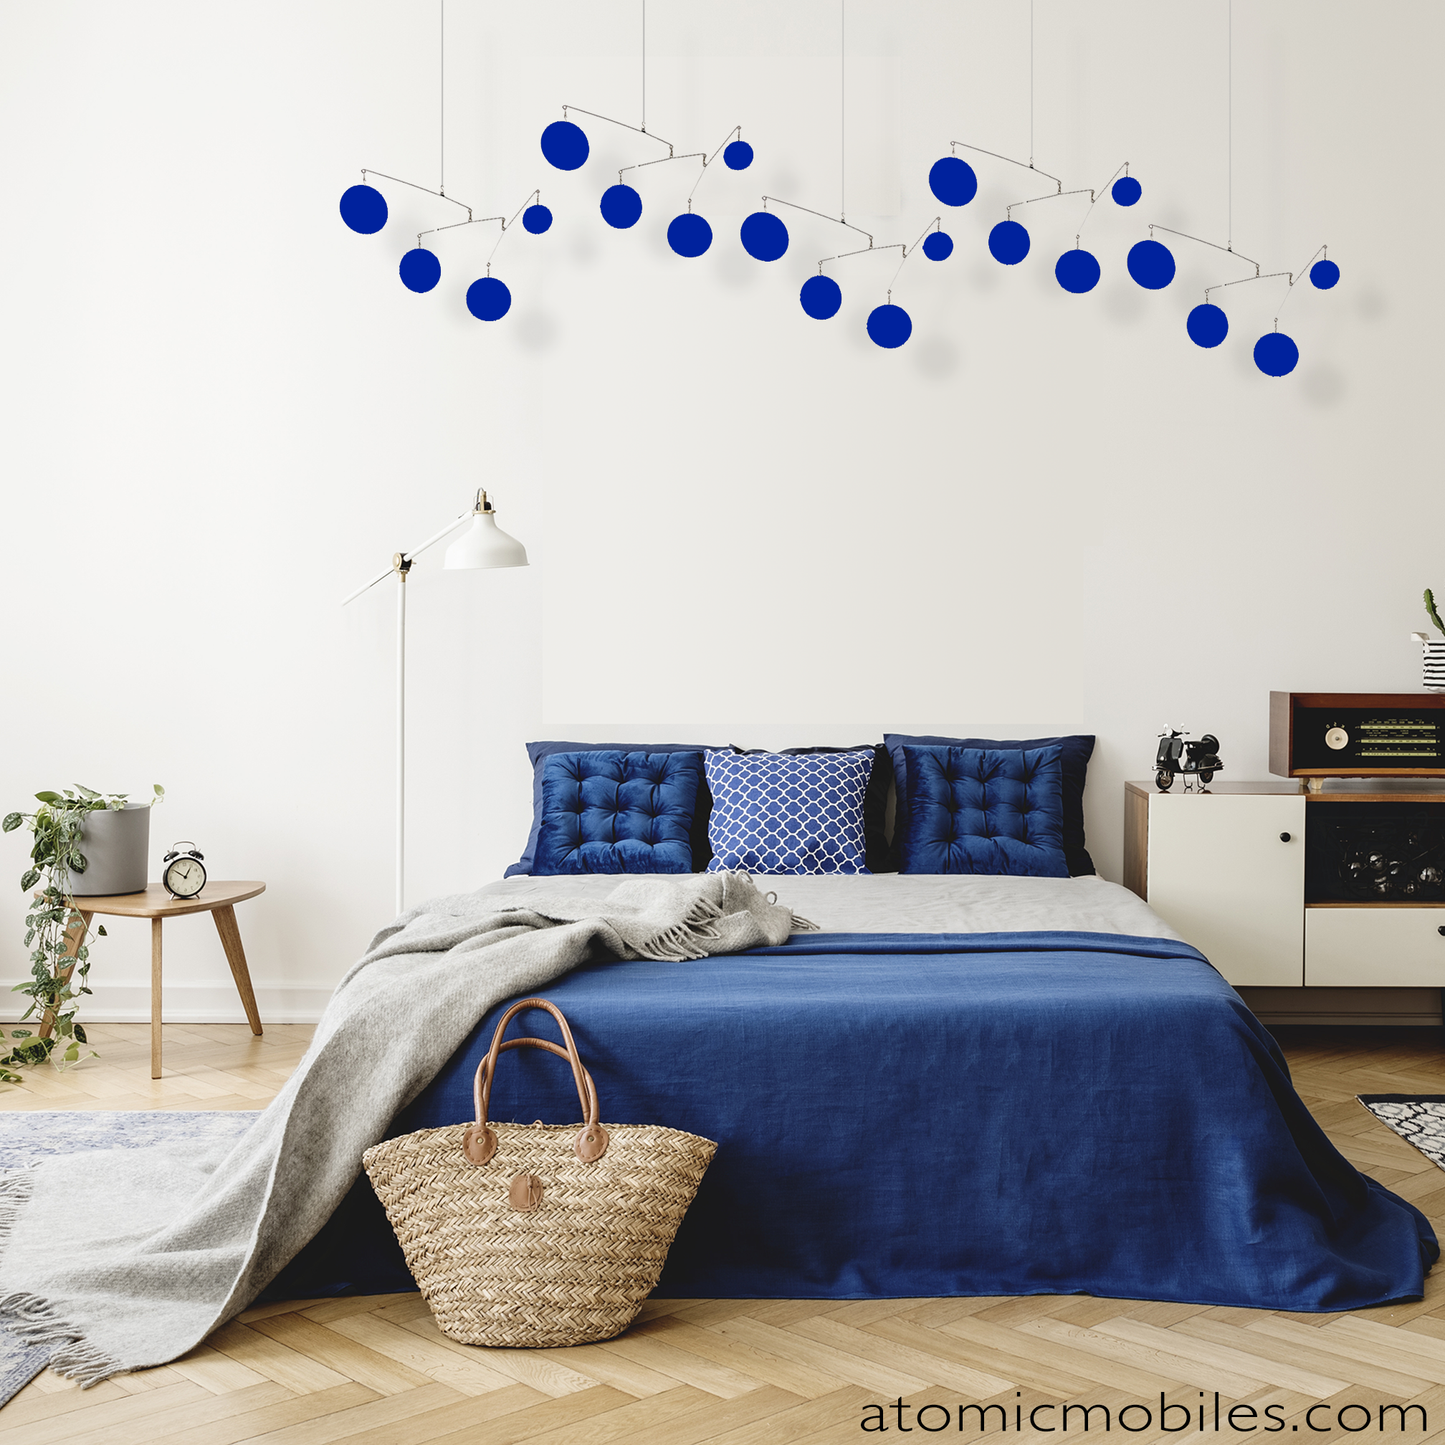 The Atomic Mobile in cozy bedroom in shades of navy blue by AtomicMobiles.com